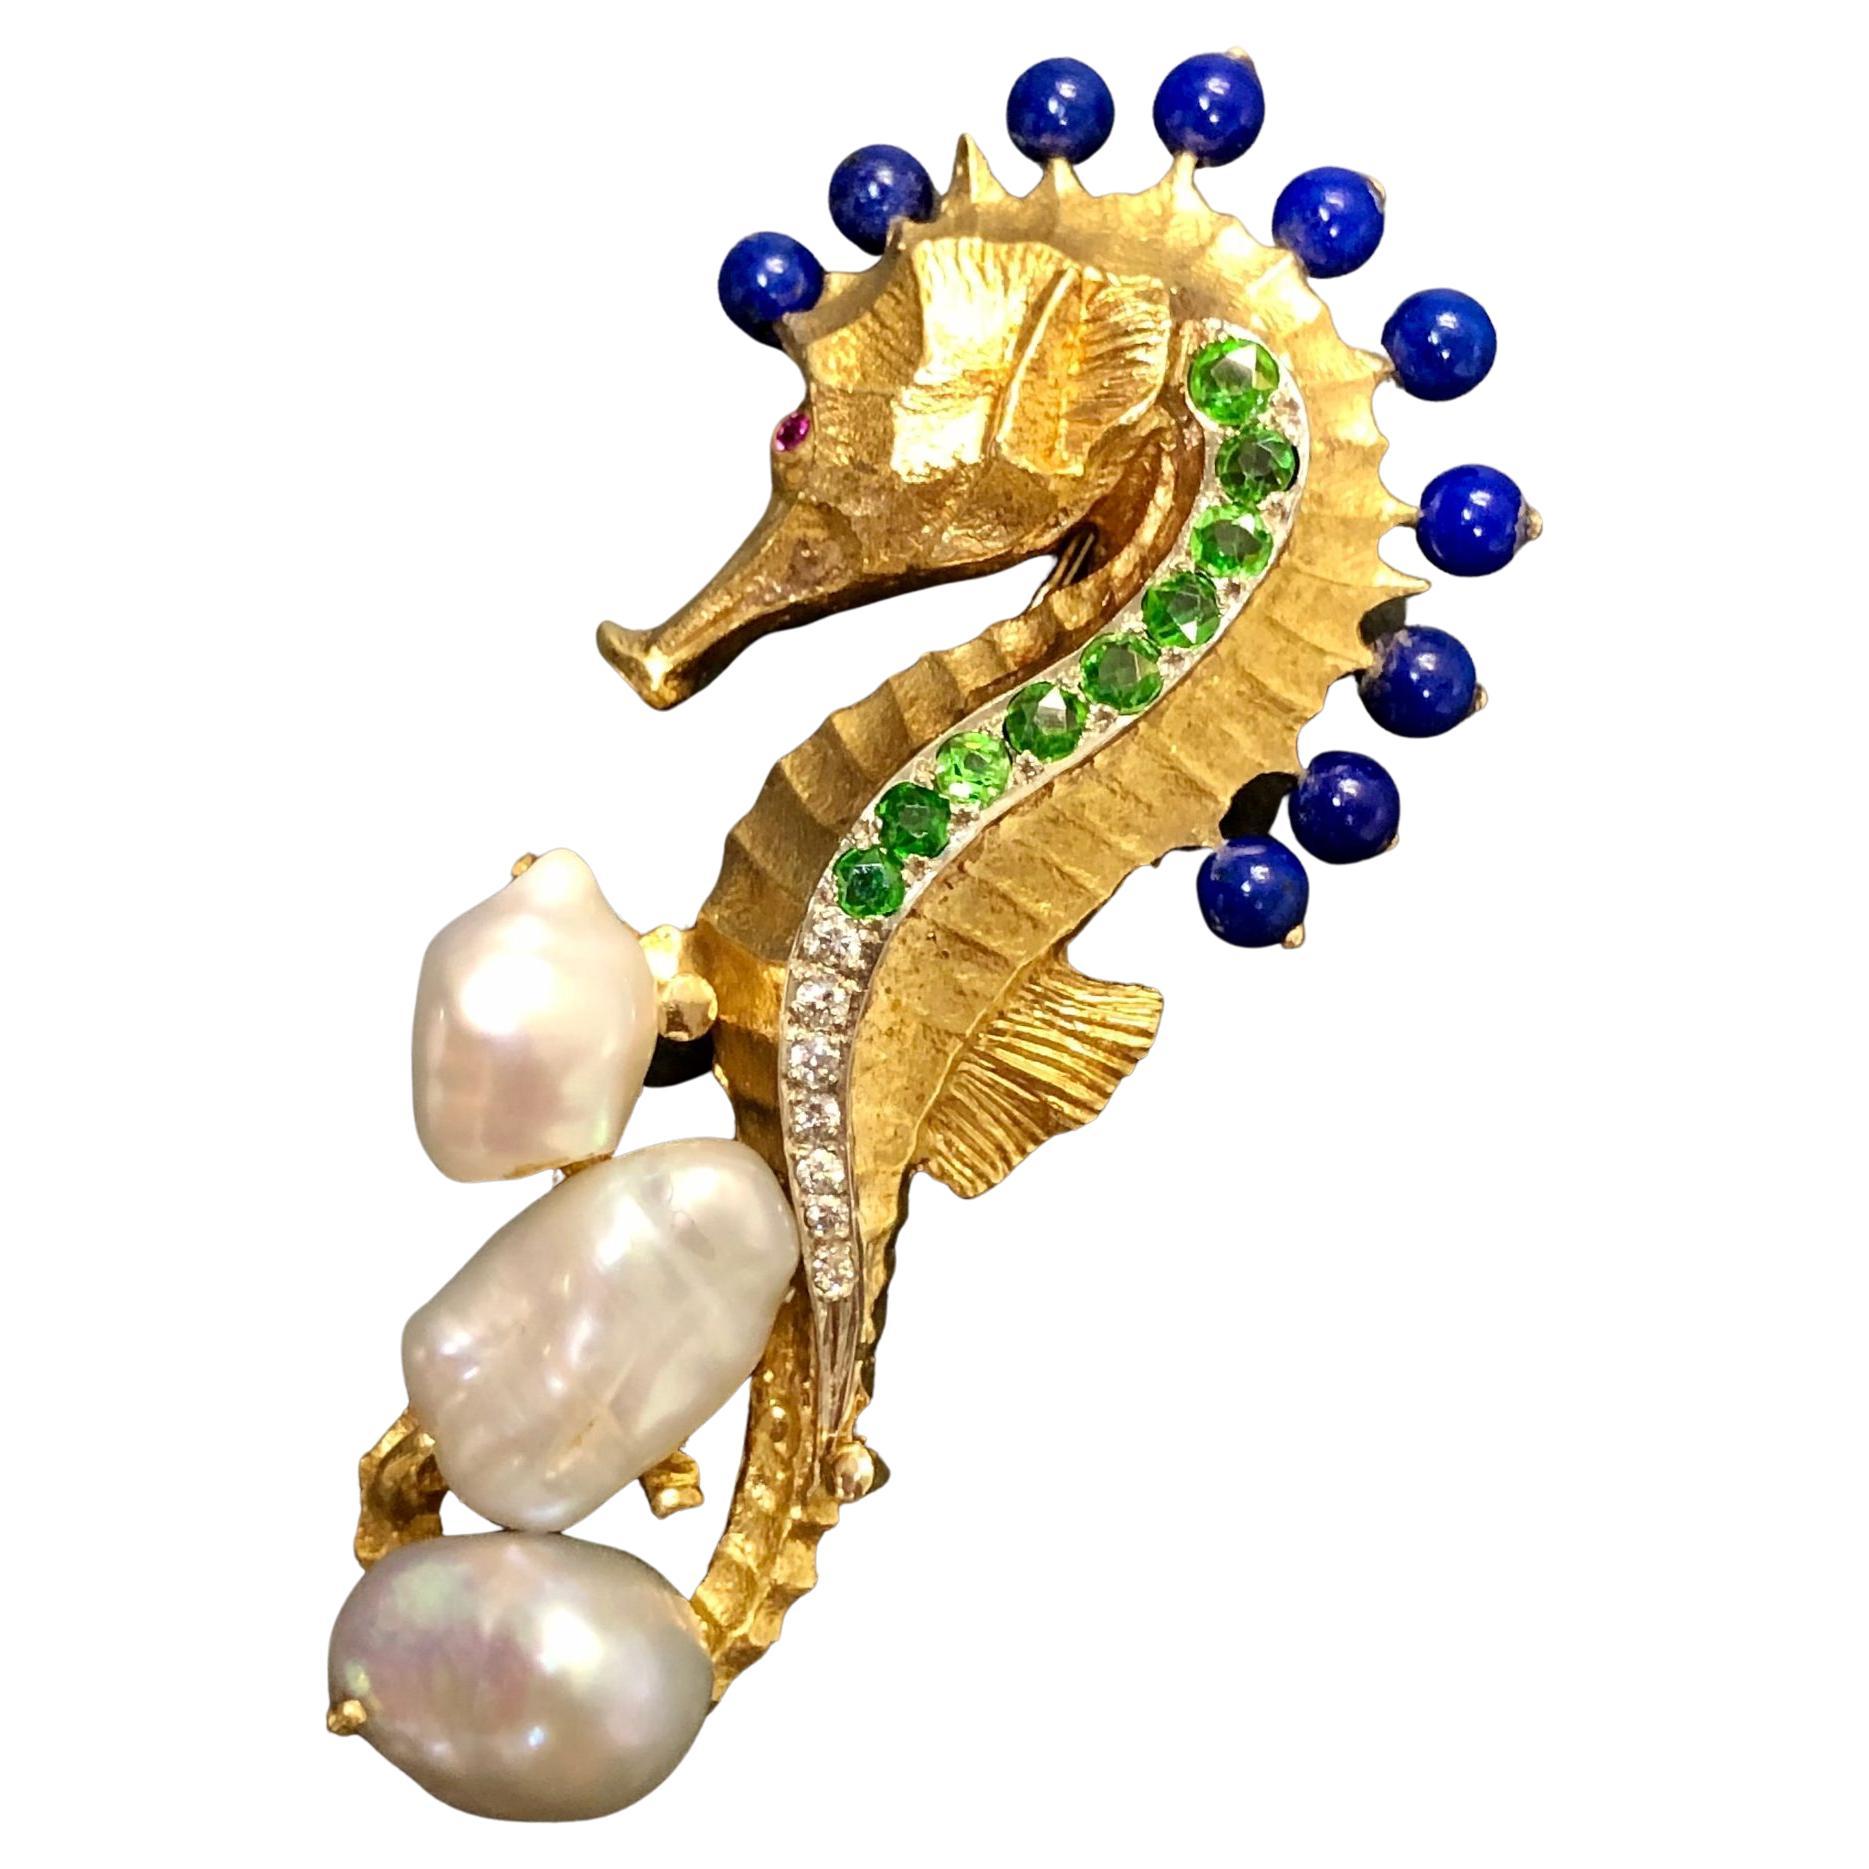 This stunning and detailed piece has been hand crafted in 18K yellow gold and masterfully etched into the magnificent nautical creation you see before you. There are beautifully electric tsavorite garnets, clean white diamonds as well as beads of